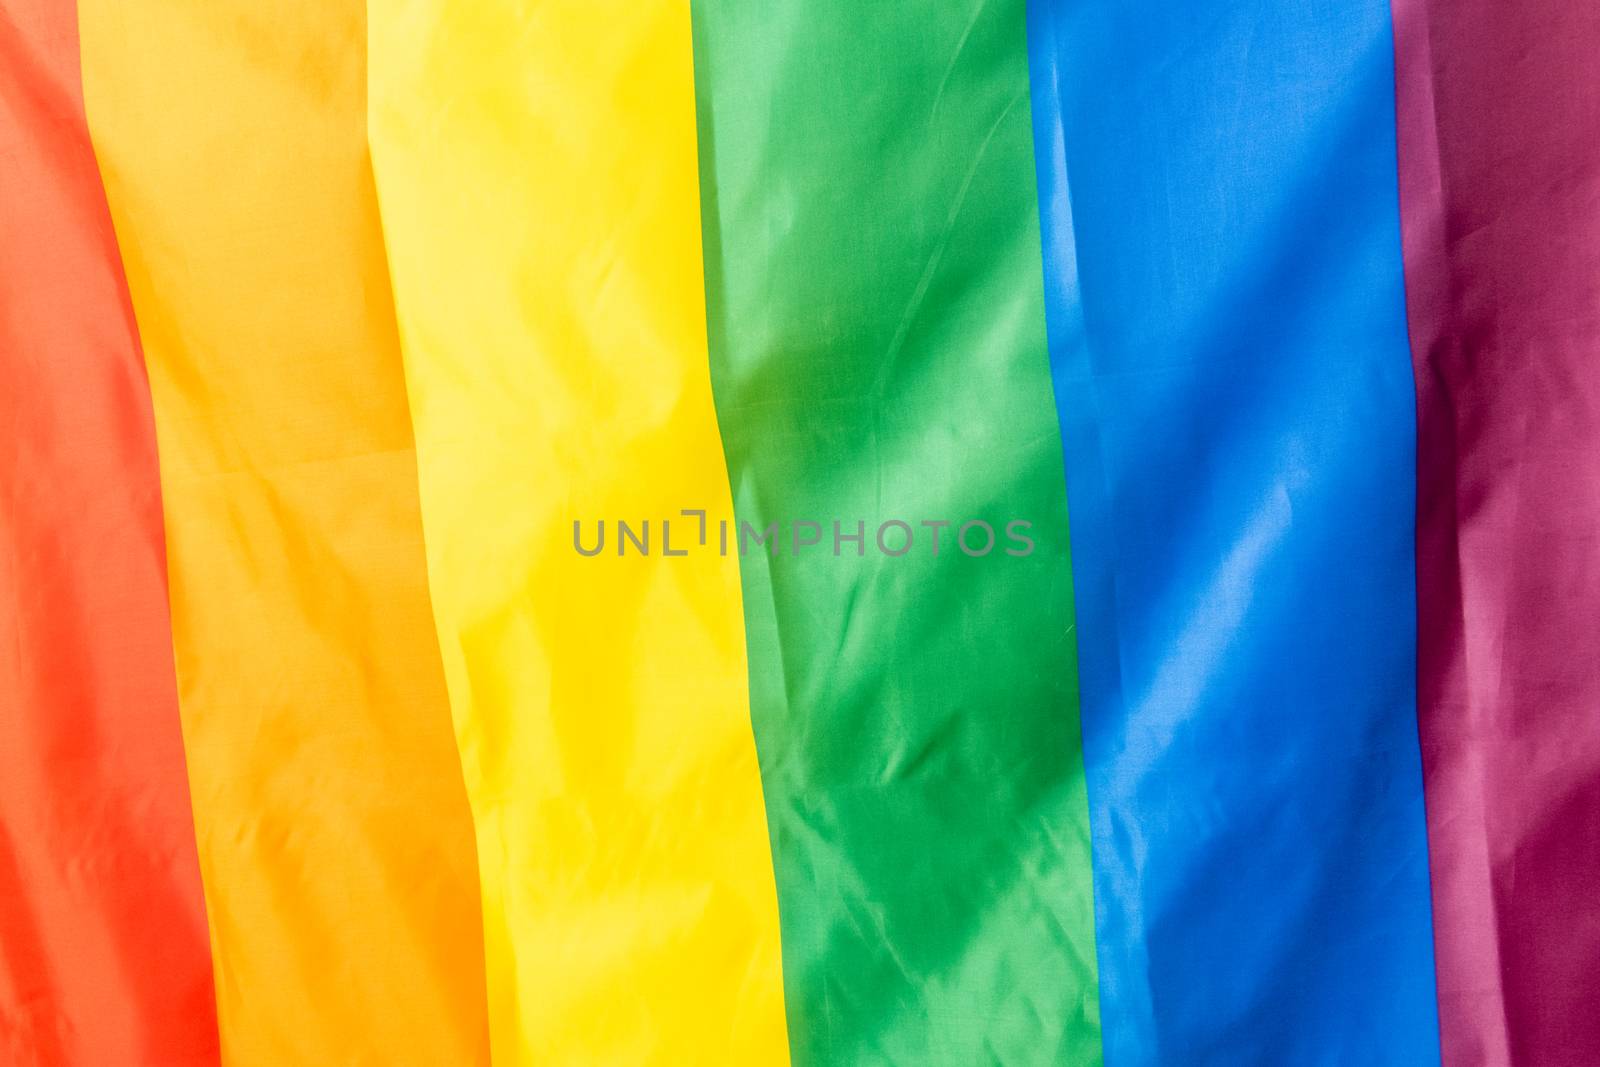 The Rainbow Flag, used as a symbol of LGBTQ pride movements by imagesbykenny